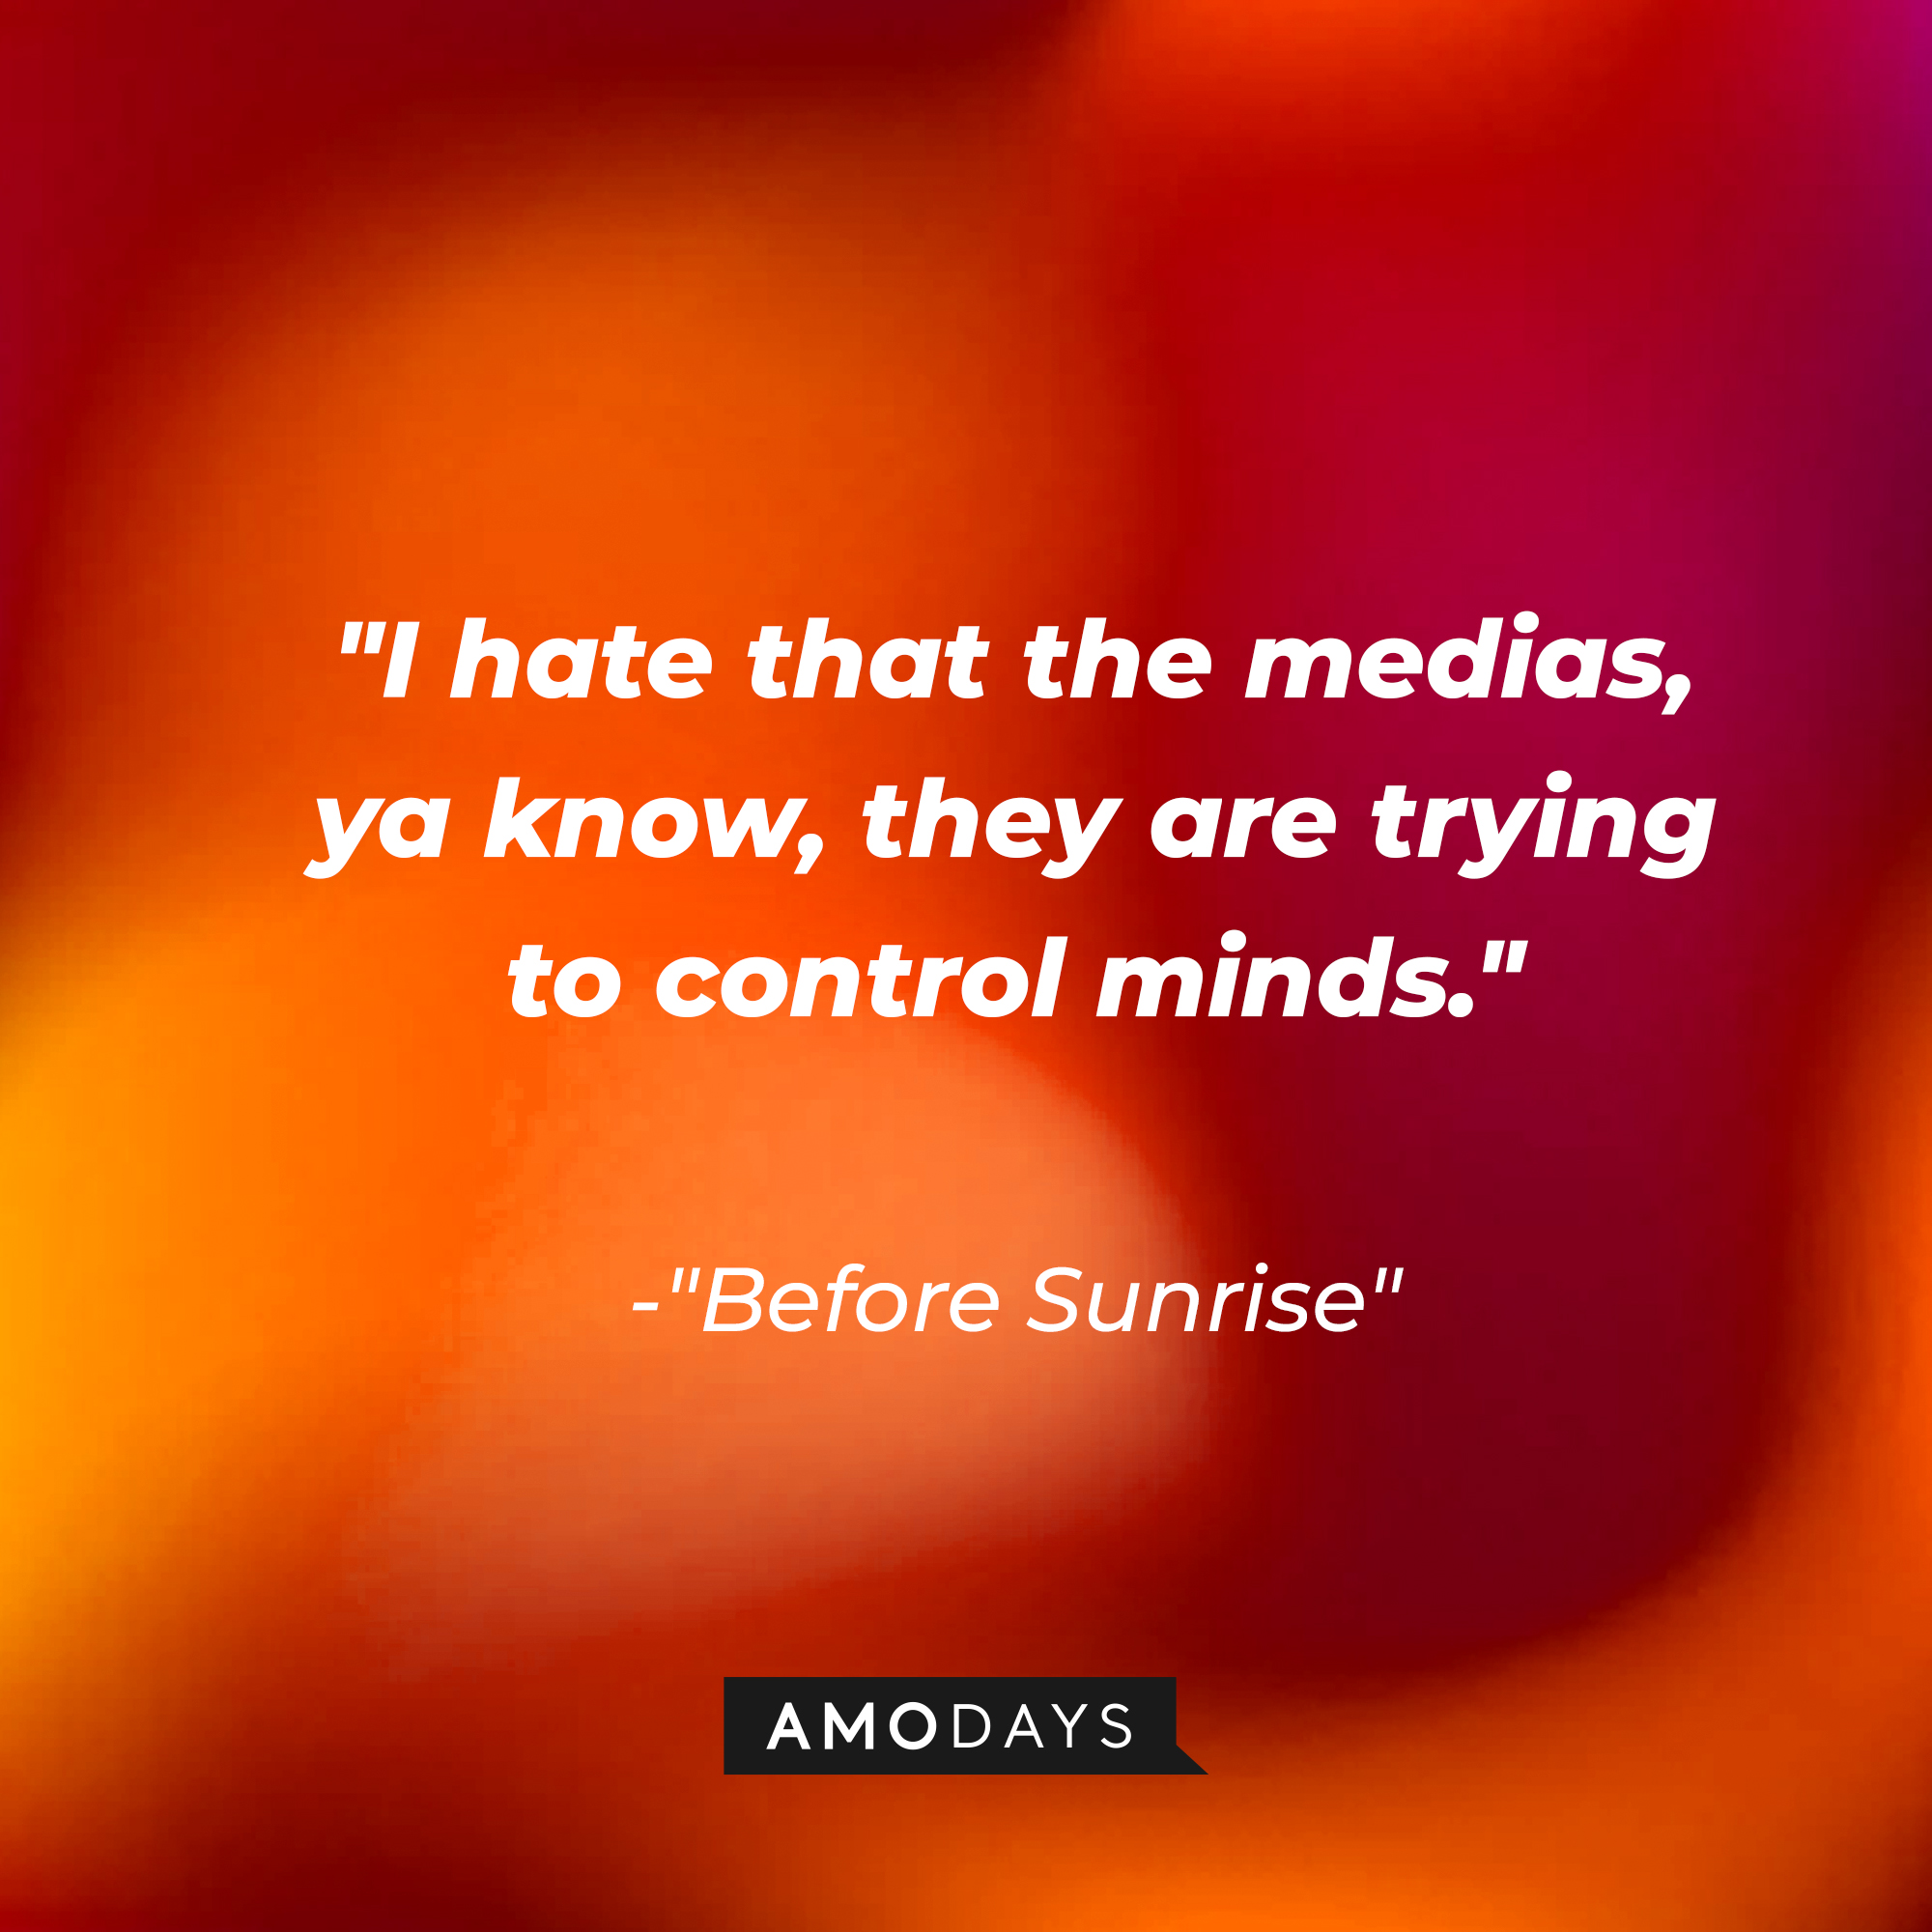 "Before Sunrise" quote: "I hate that the medias, ya know, they are trying to control minds." | Source: AmoDays